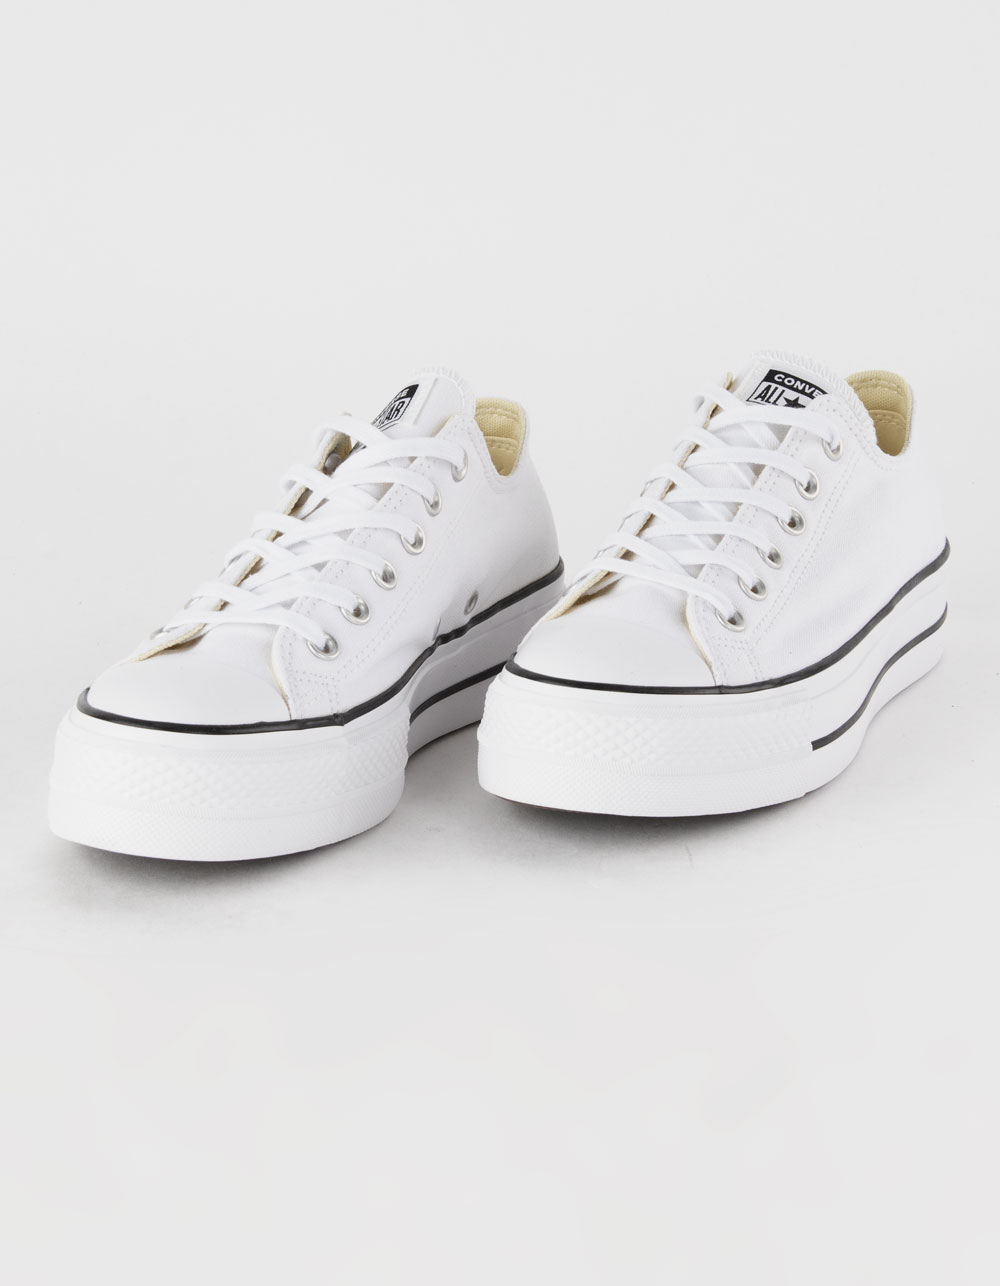 CONVERSE Taylor All Star Lift Platform Womens Low Top Shoes - Tillys